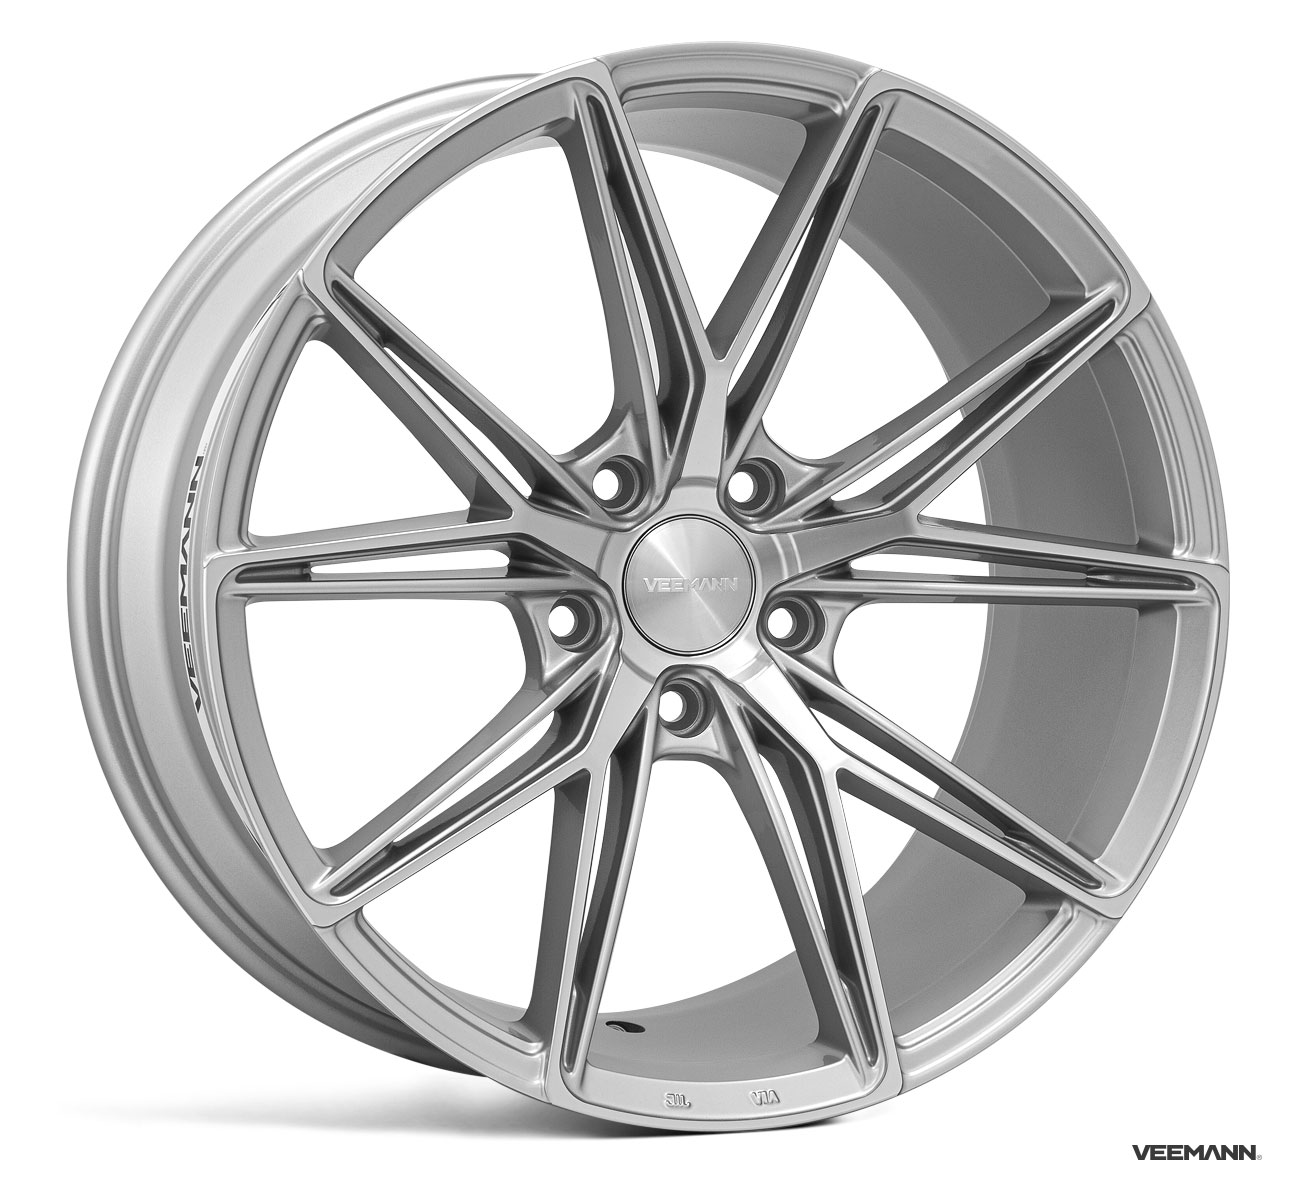 NEW 19" VEEMANN V-FS49 ALLOY WHEELS IN SILVER POLISHED WITH WIDER 9.5" REARS